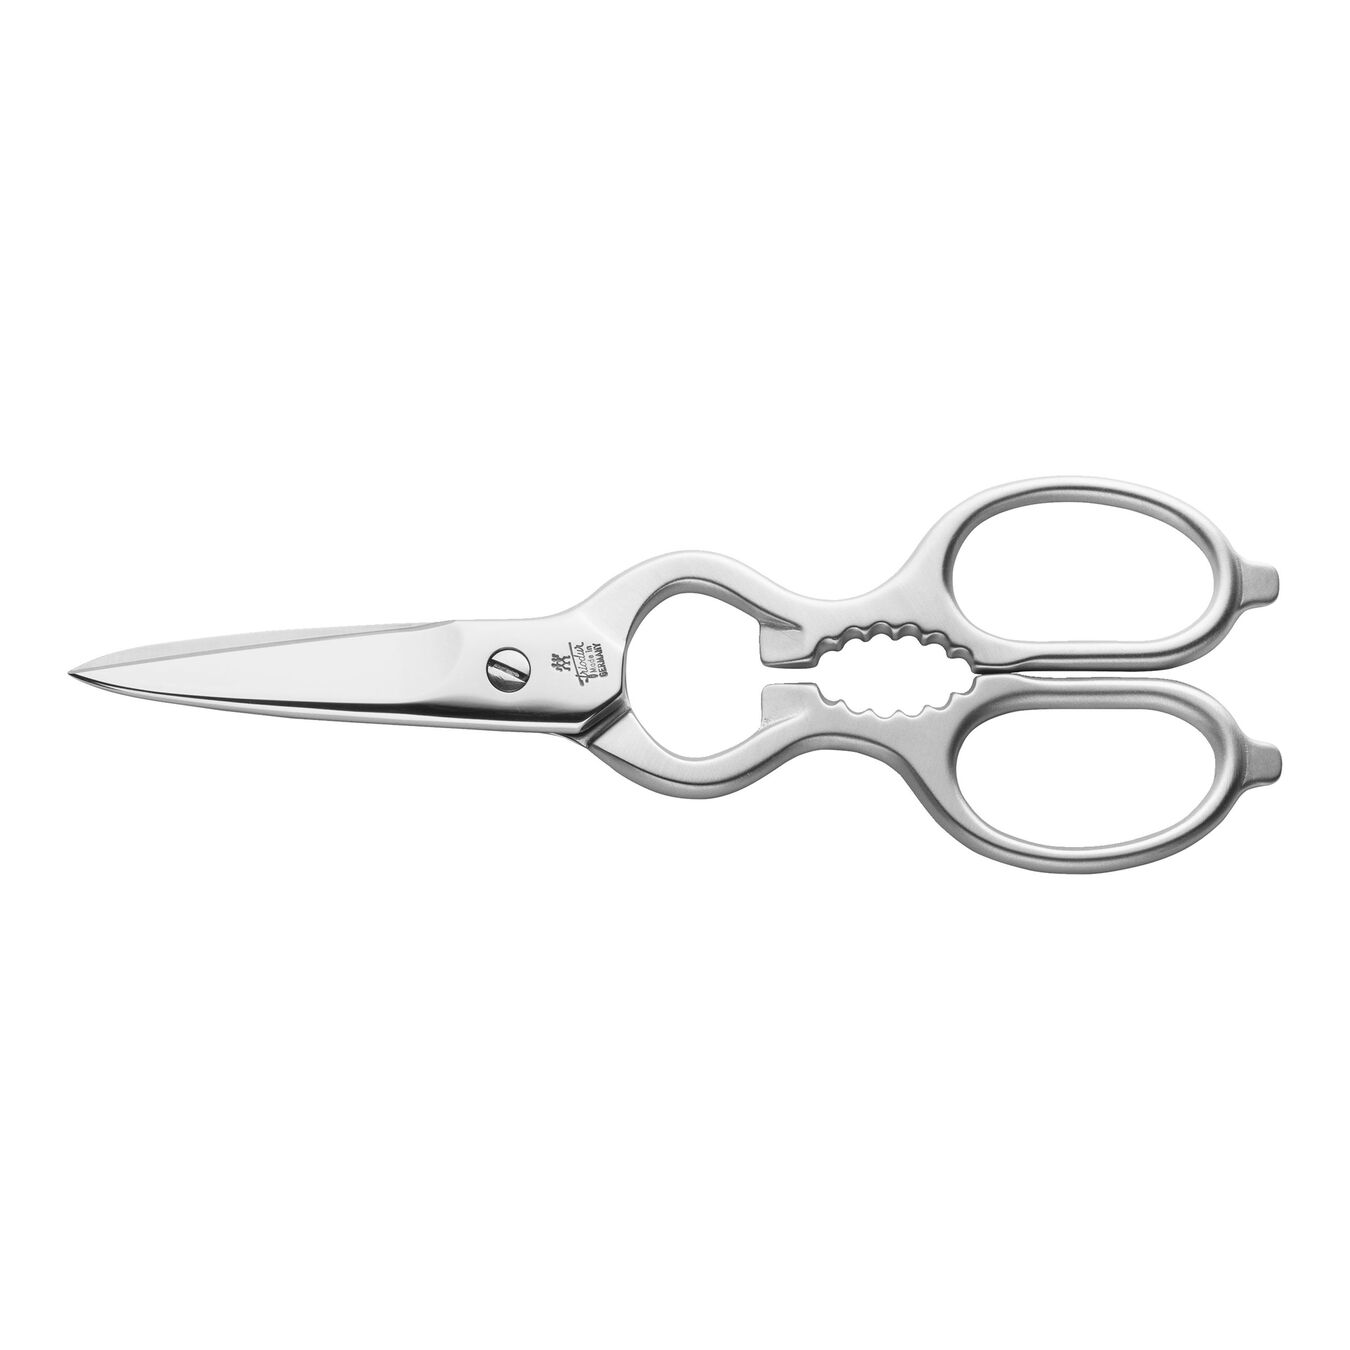 Stainless steel Multi-purpose shears silver,,large 1